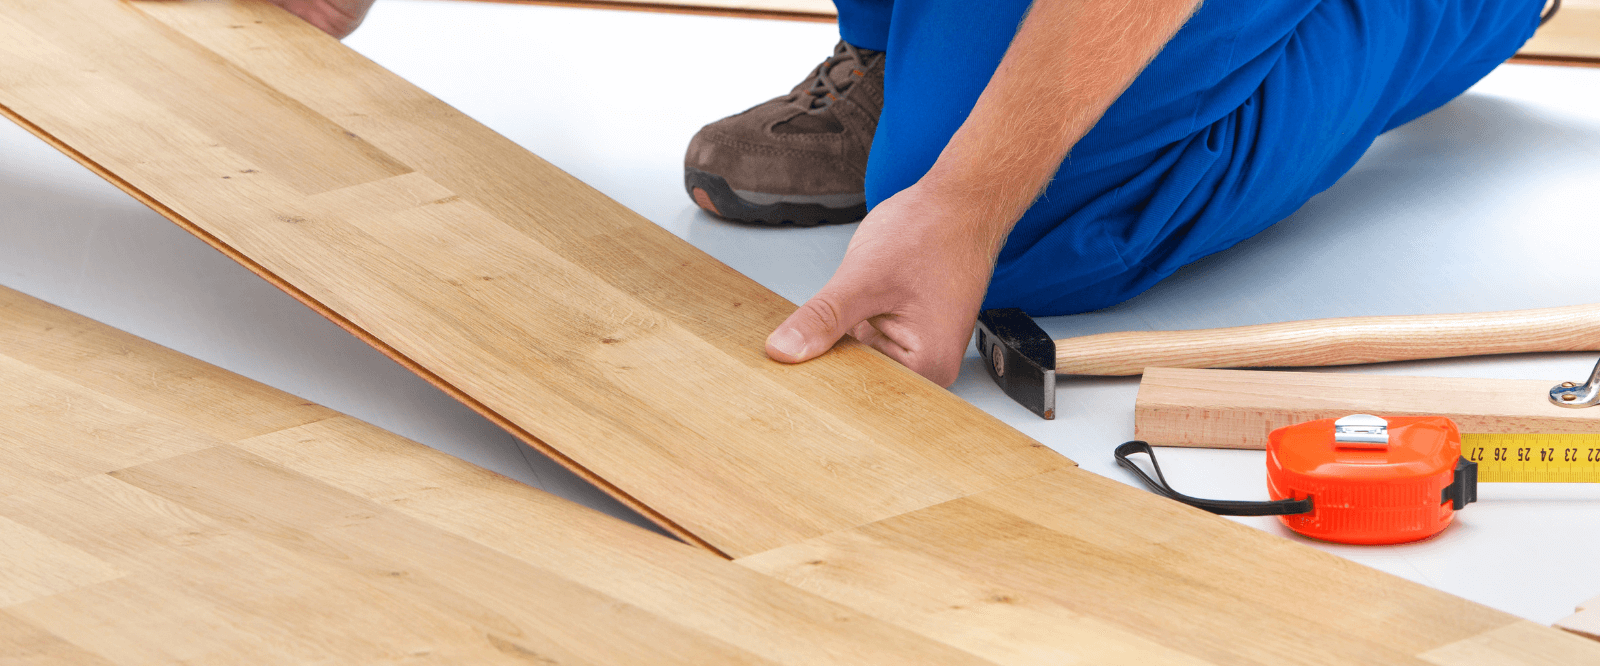 How To Clean and Maintain Laminates